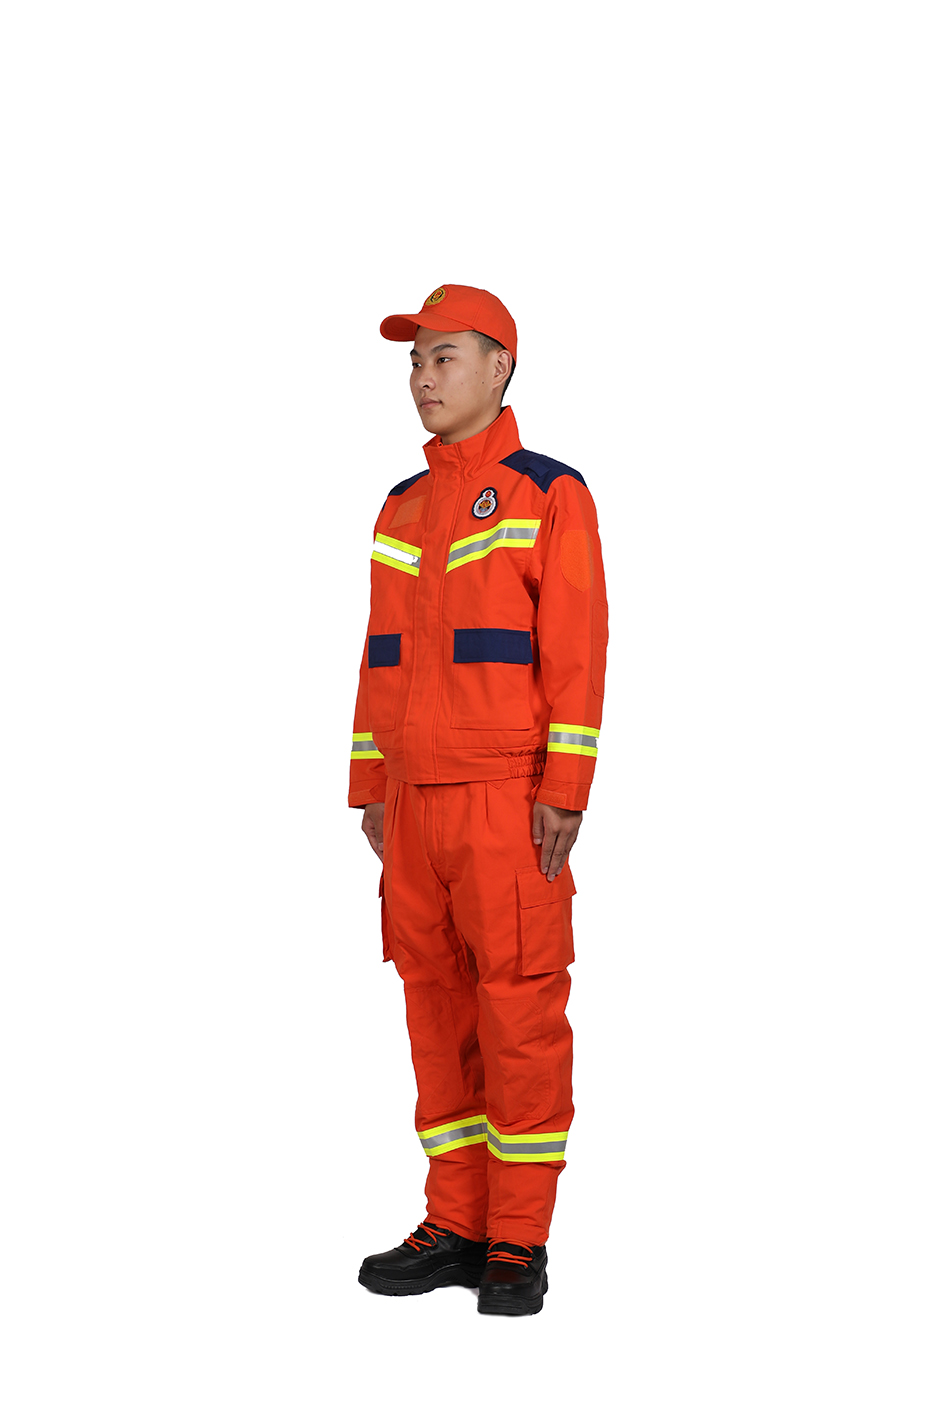 New Technology Protective Clothing to Meet the Individual Protection Needs of Emergency Rescue